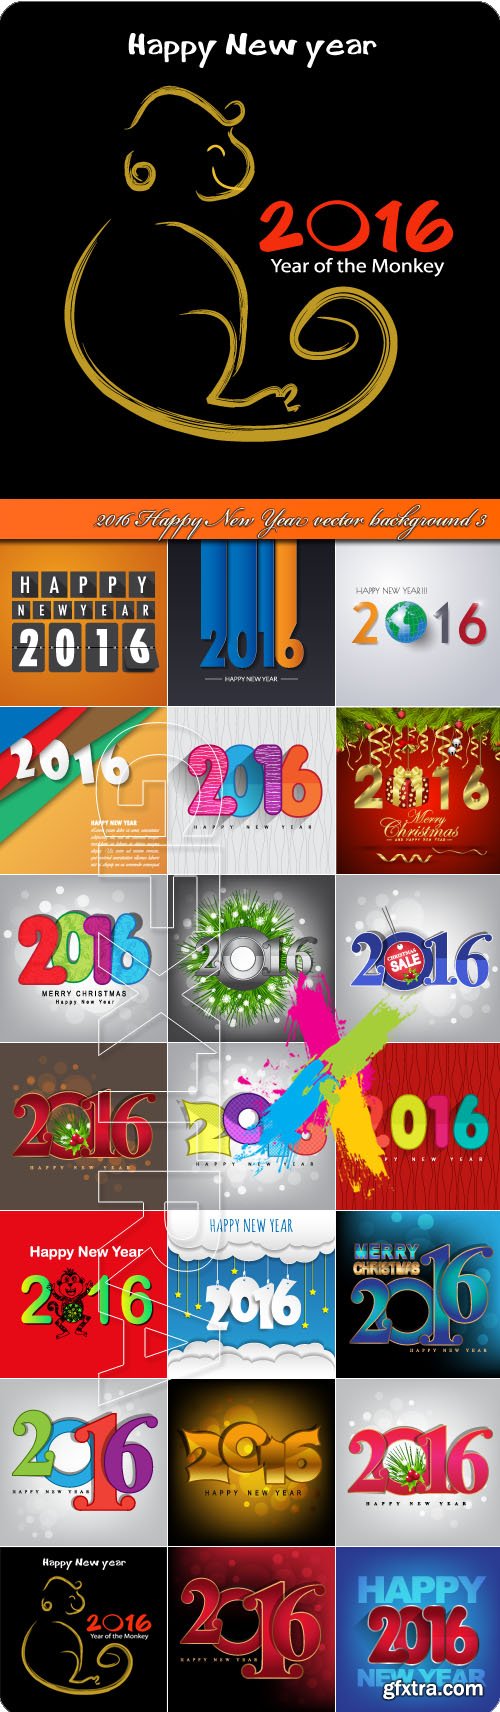 2016 Happy New Year vector background 3